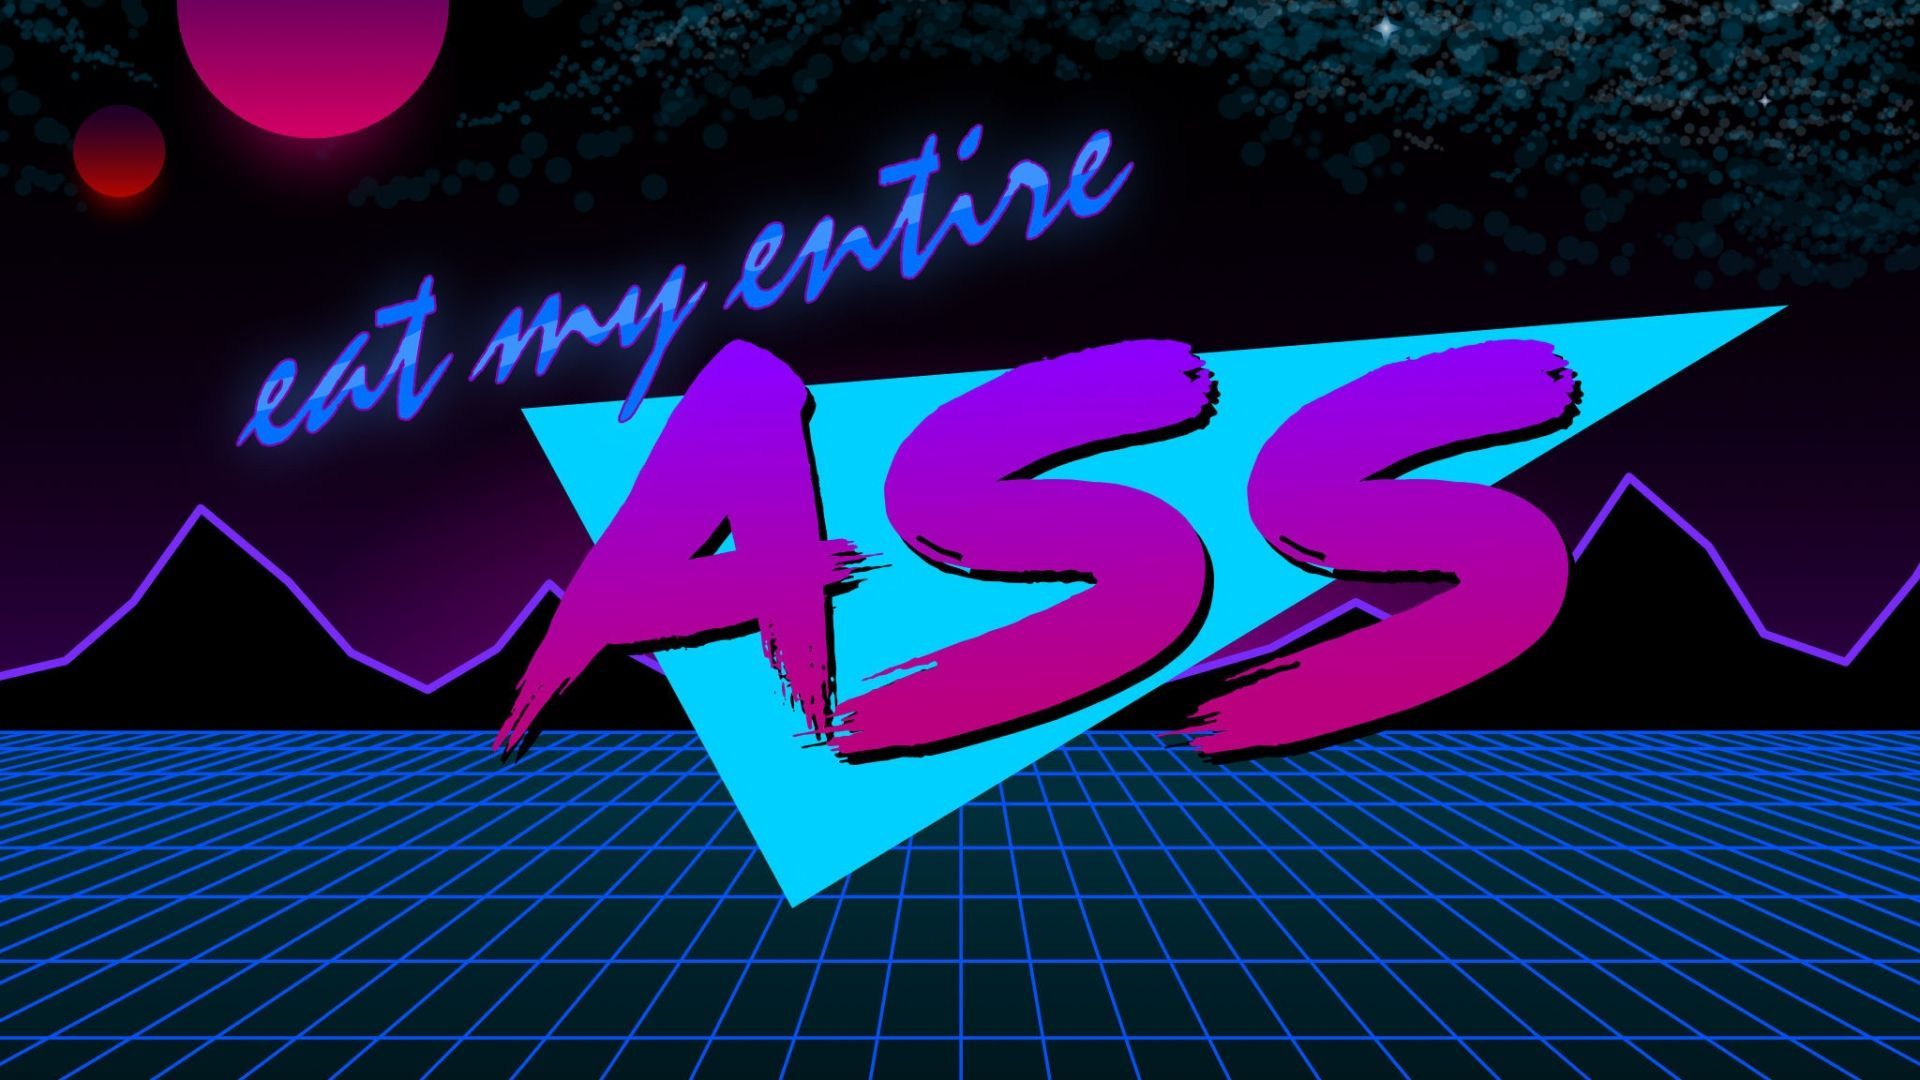 Eat my entree asss - 80s